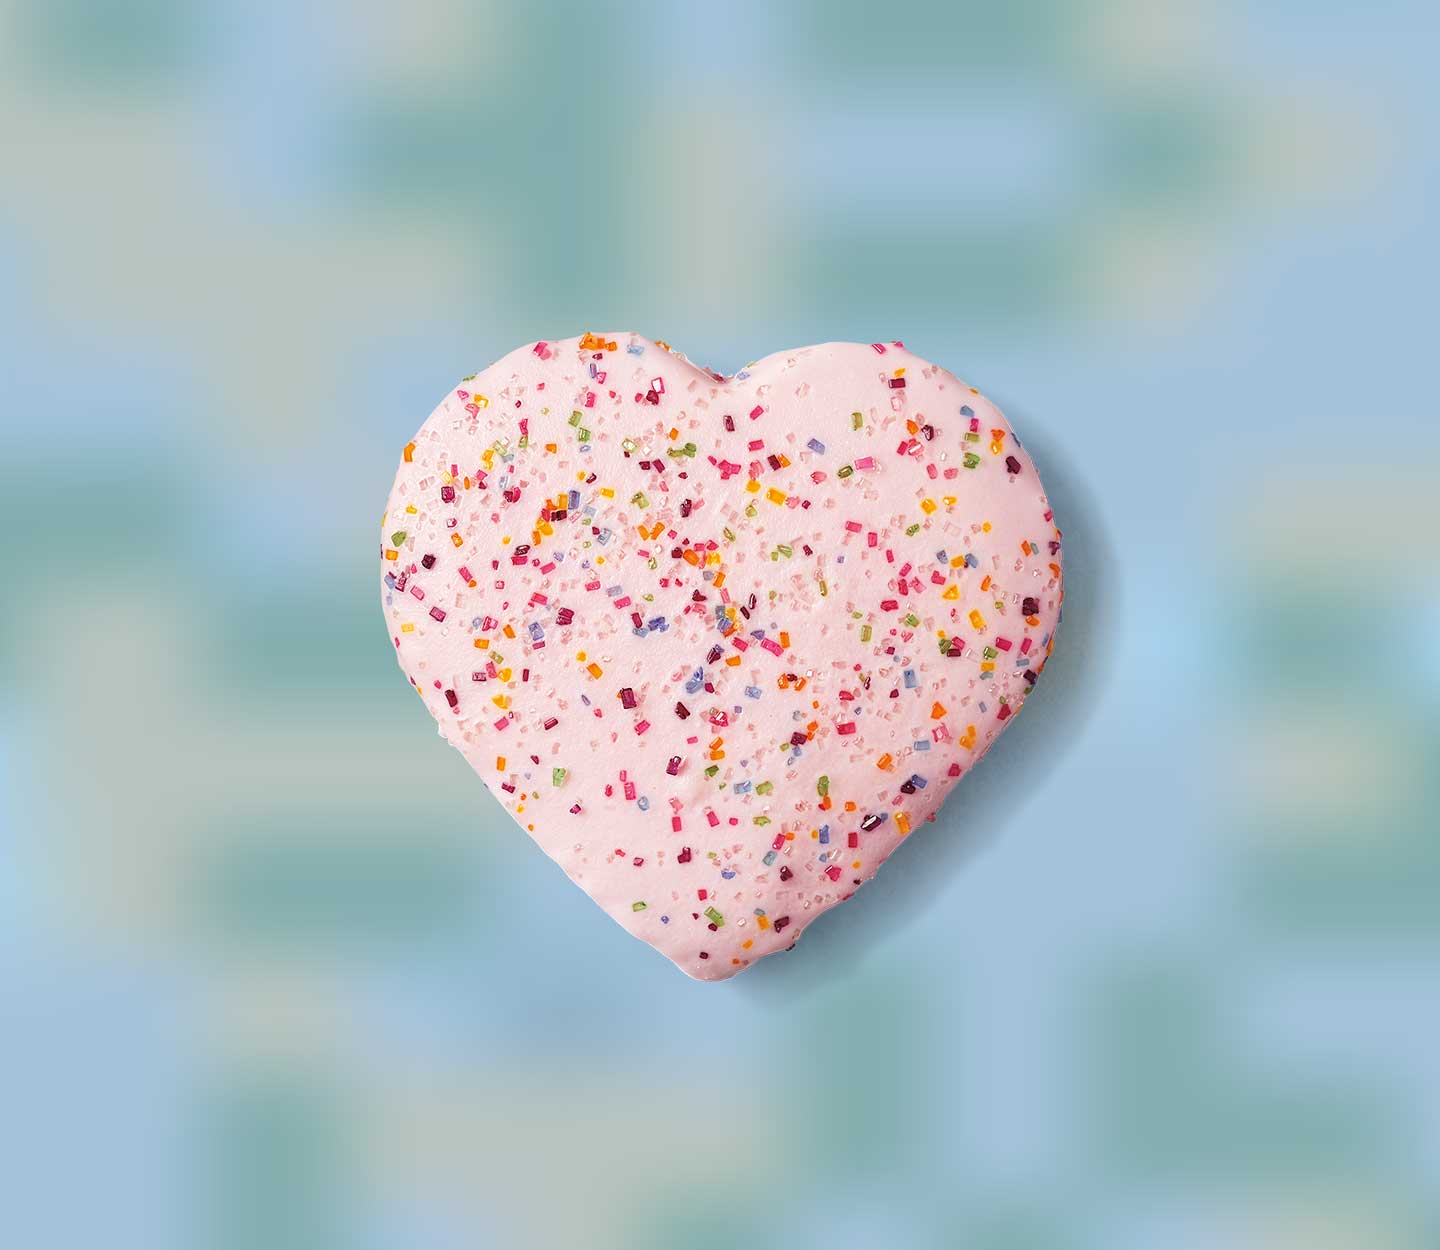 A heart-shaped cookie covered in colourful sprinkles.